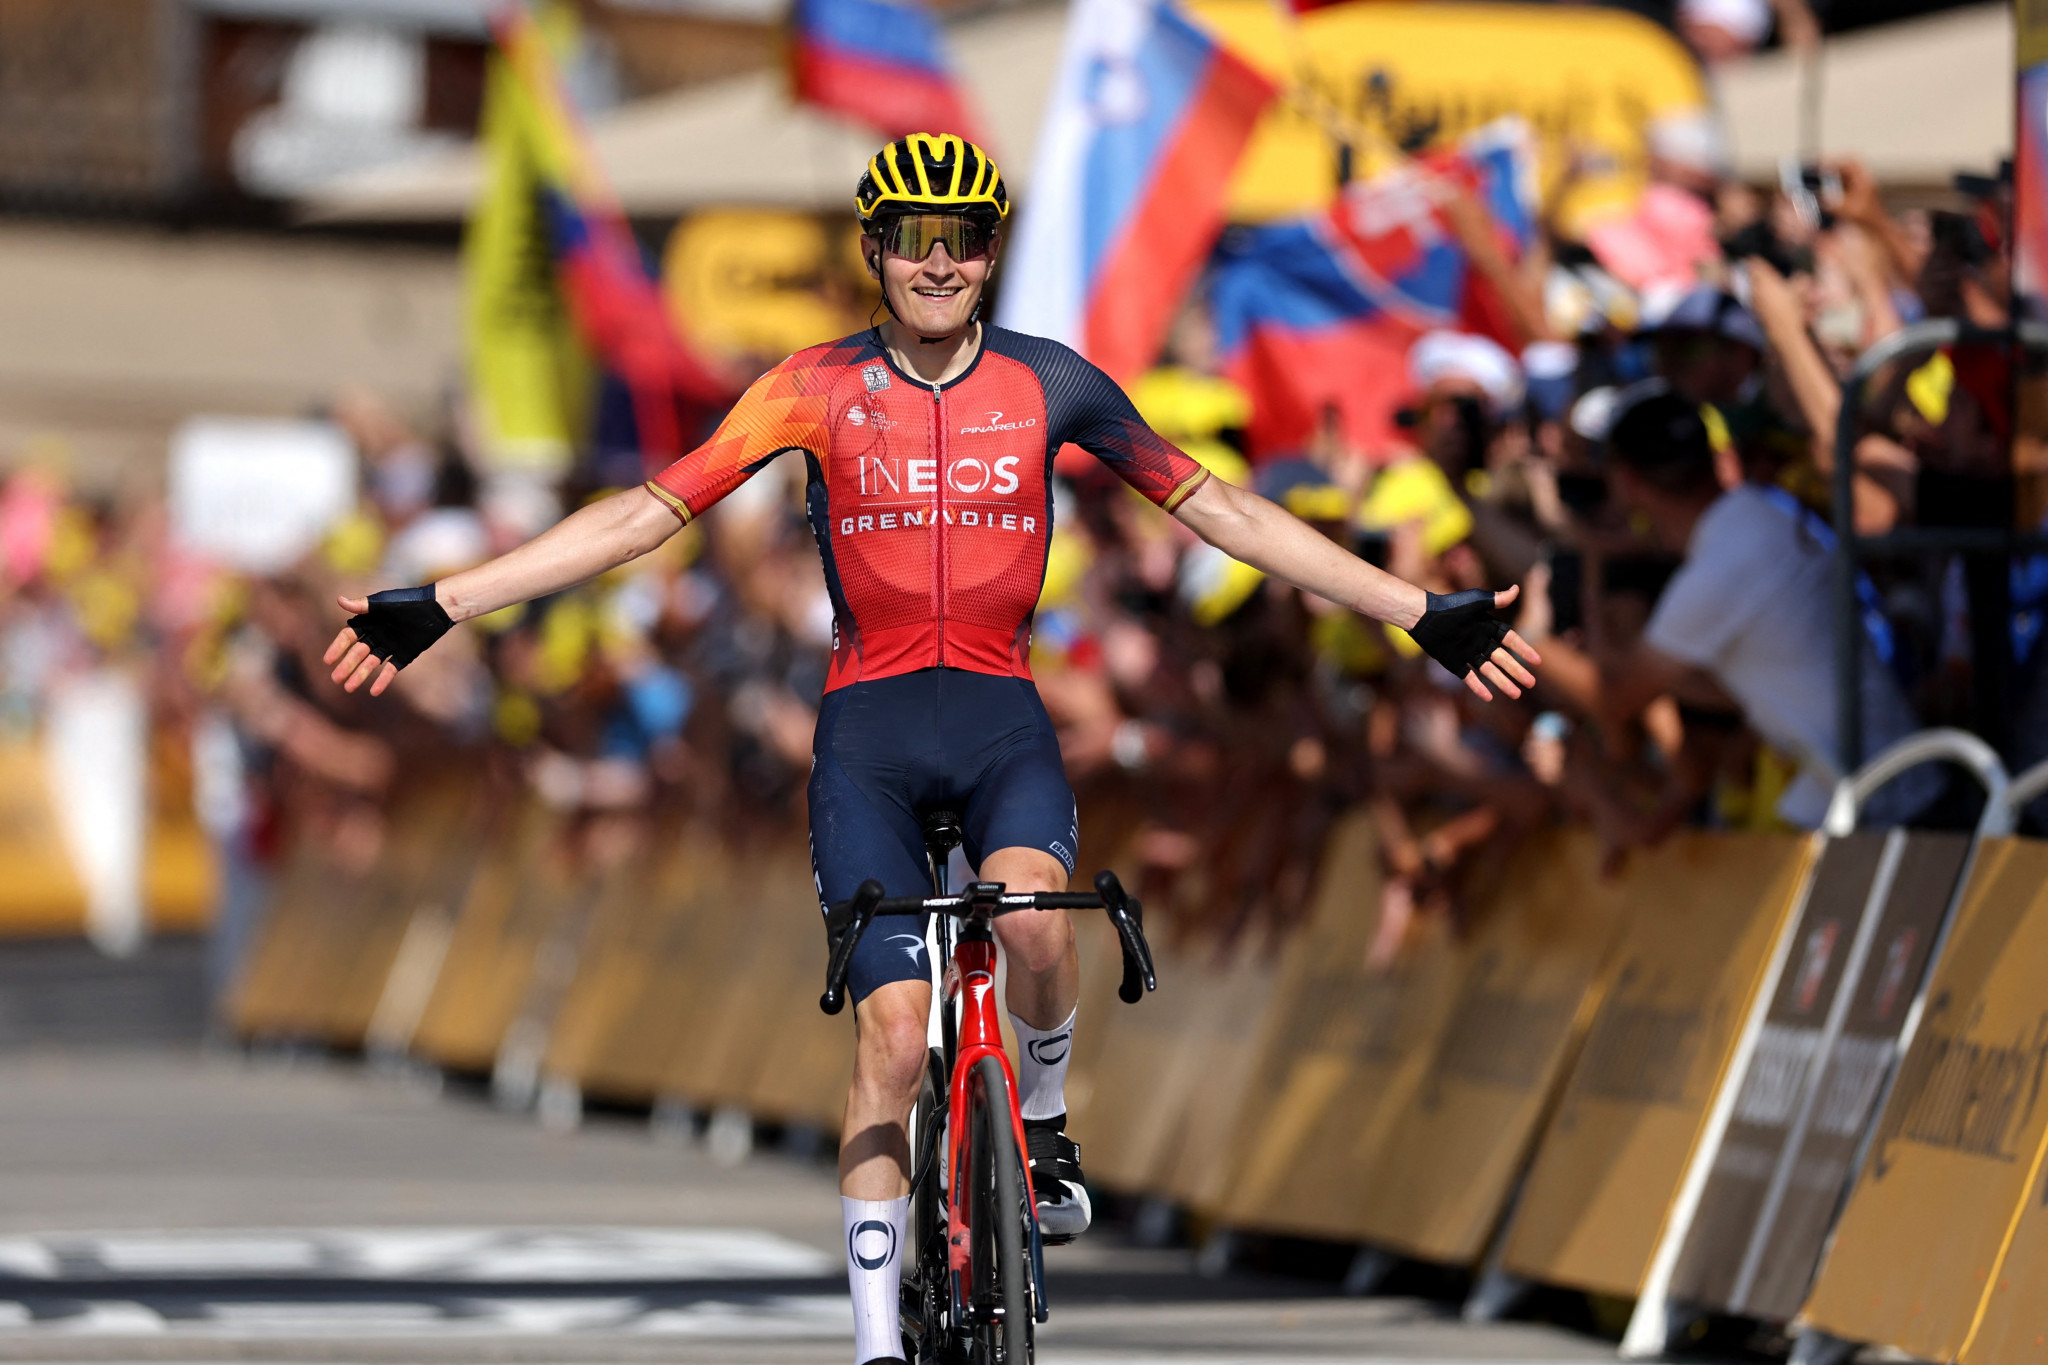 Spain’s Carlos Rodriguez celebrates after winning stage 14 ©Getty Images